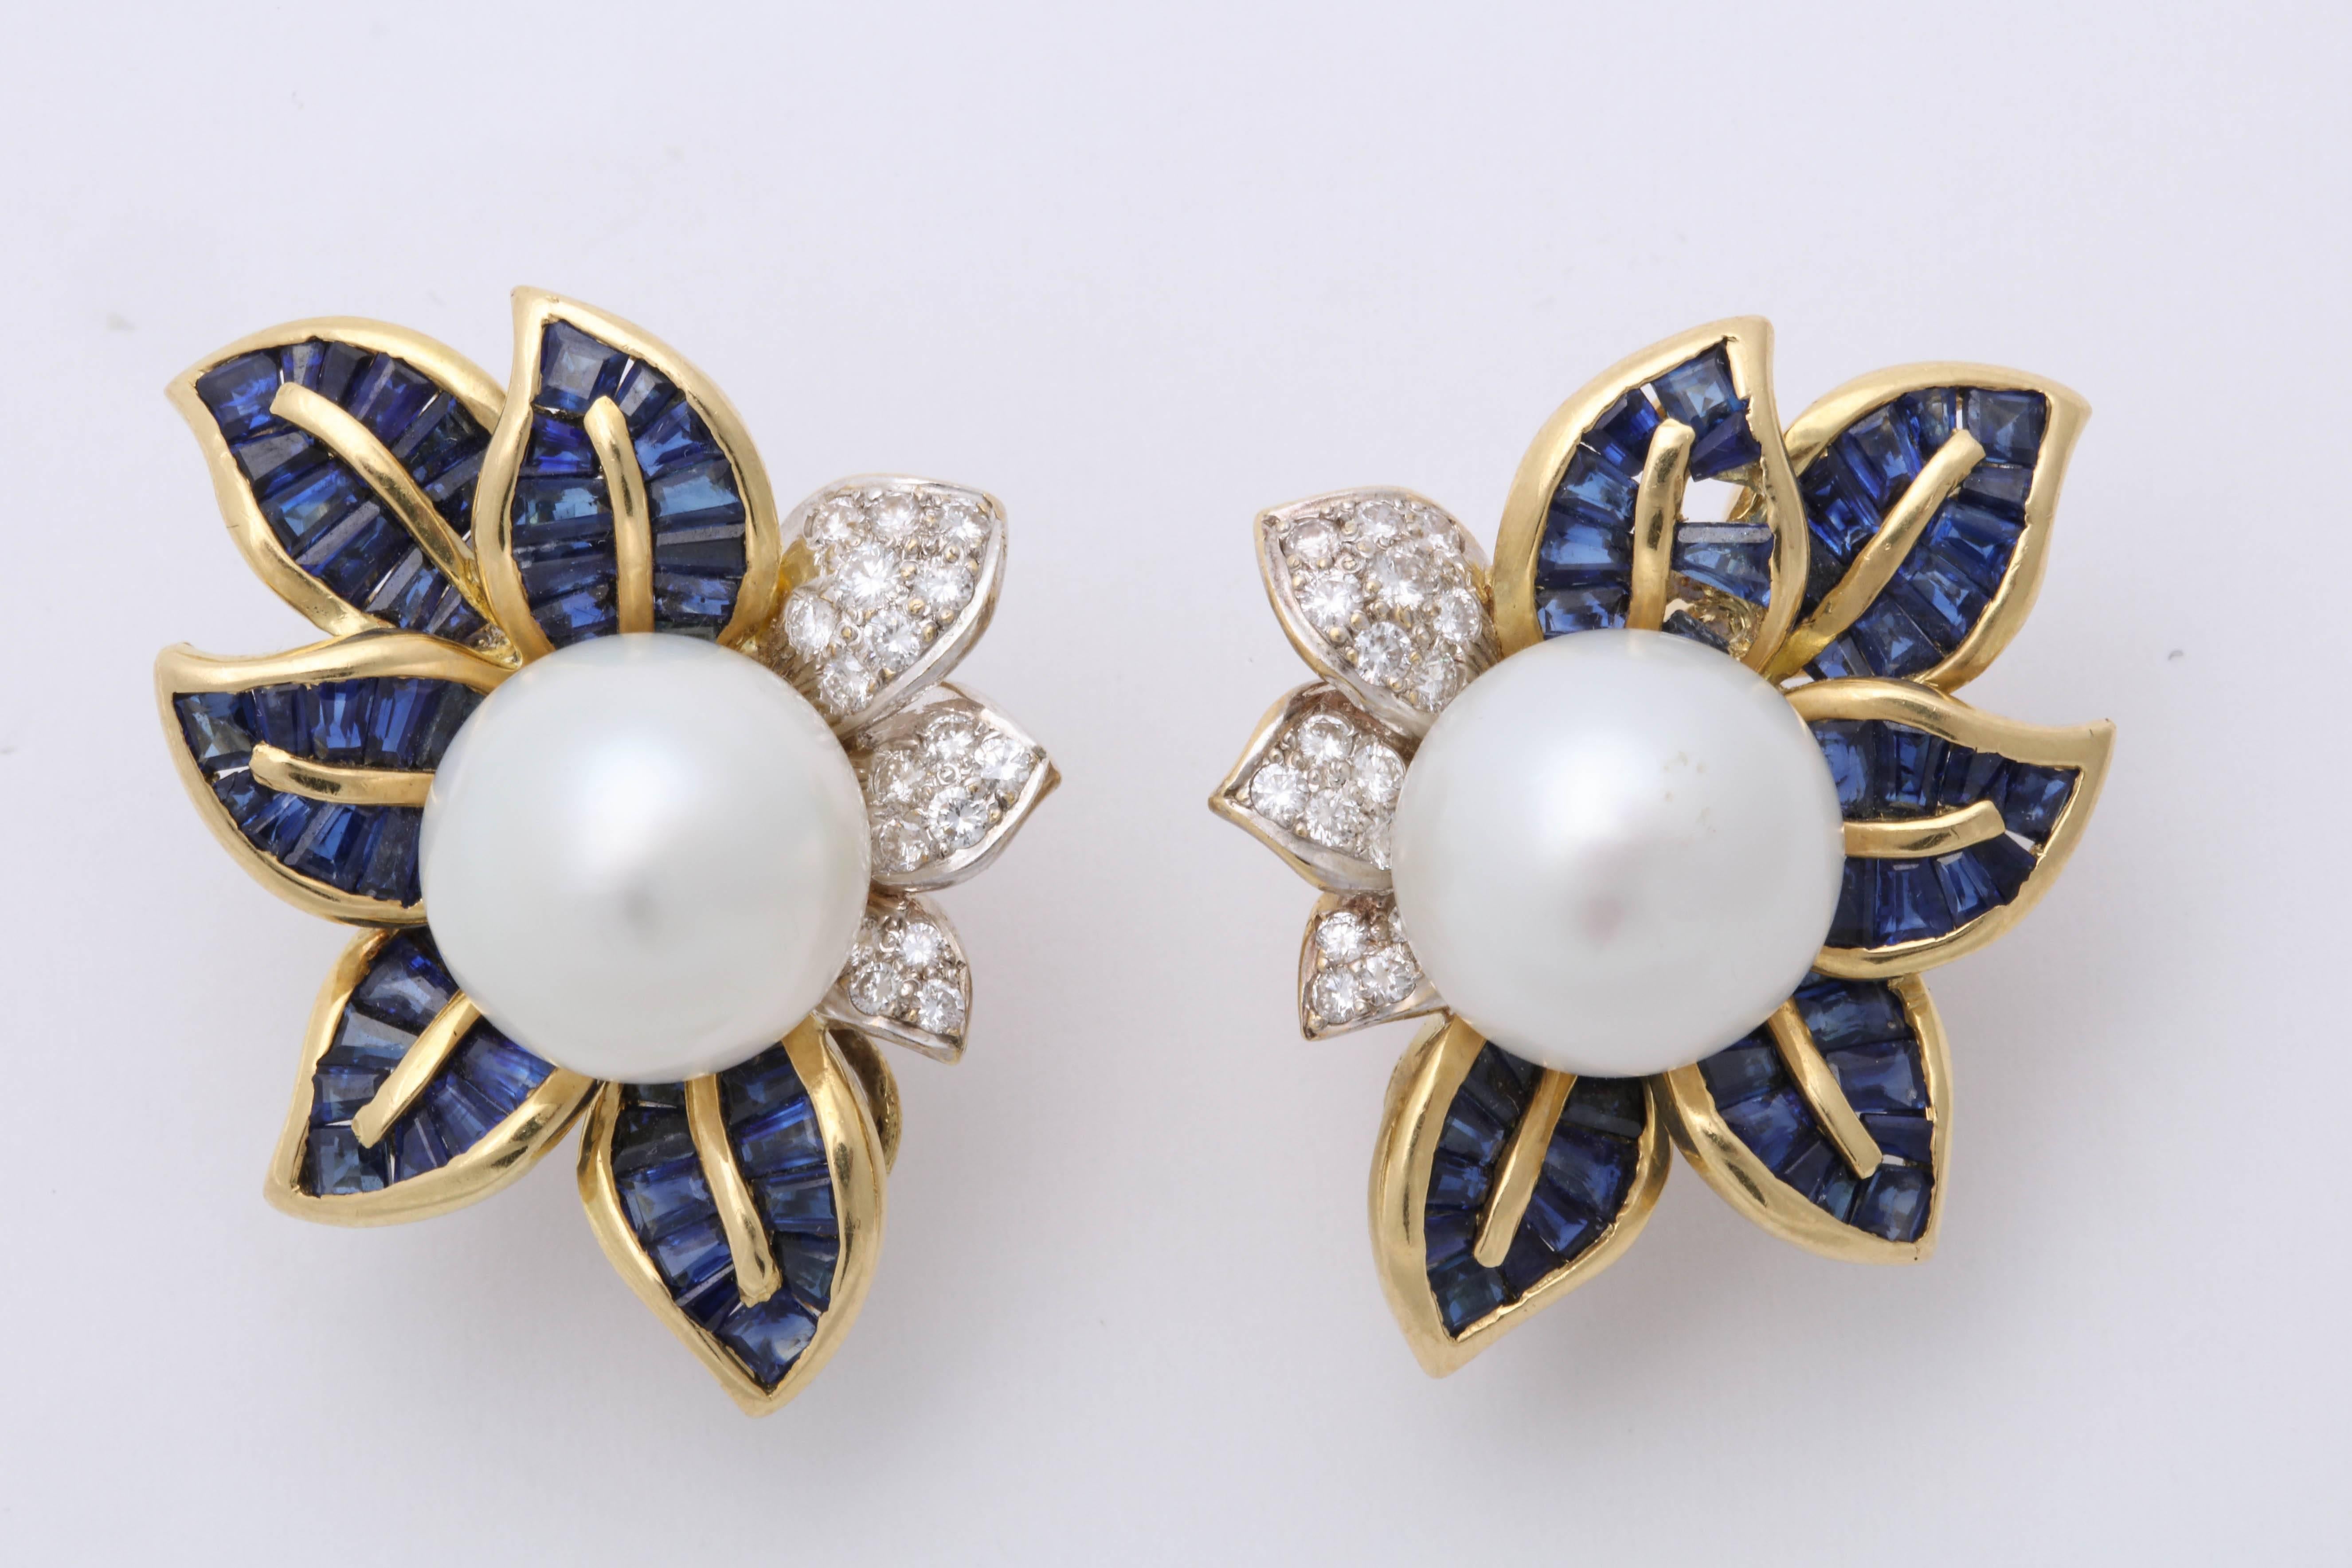 One Pair of Ladies Flower And Leaf Design earrings embellished With Two South Sea Pearls Measuring Approximately 14MM each. Each earring Is Further Decorated With Numerous Calibre Cut Custom Cut Sapphires Weighing Approximately 5 Carats Total